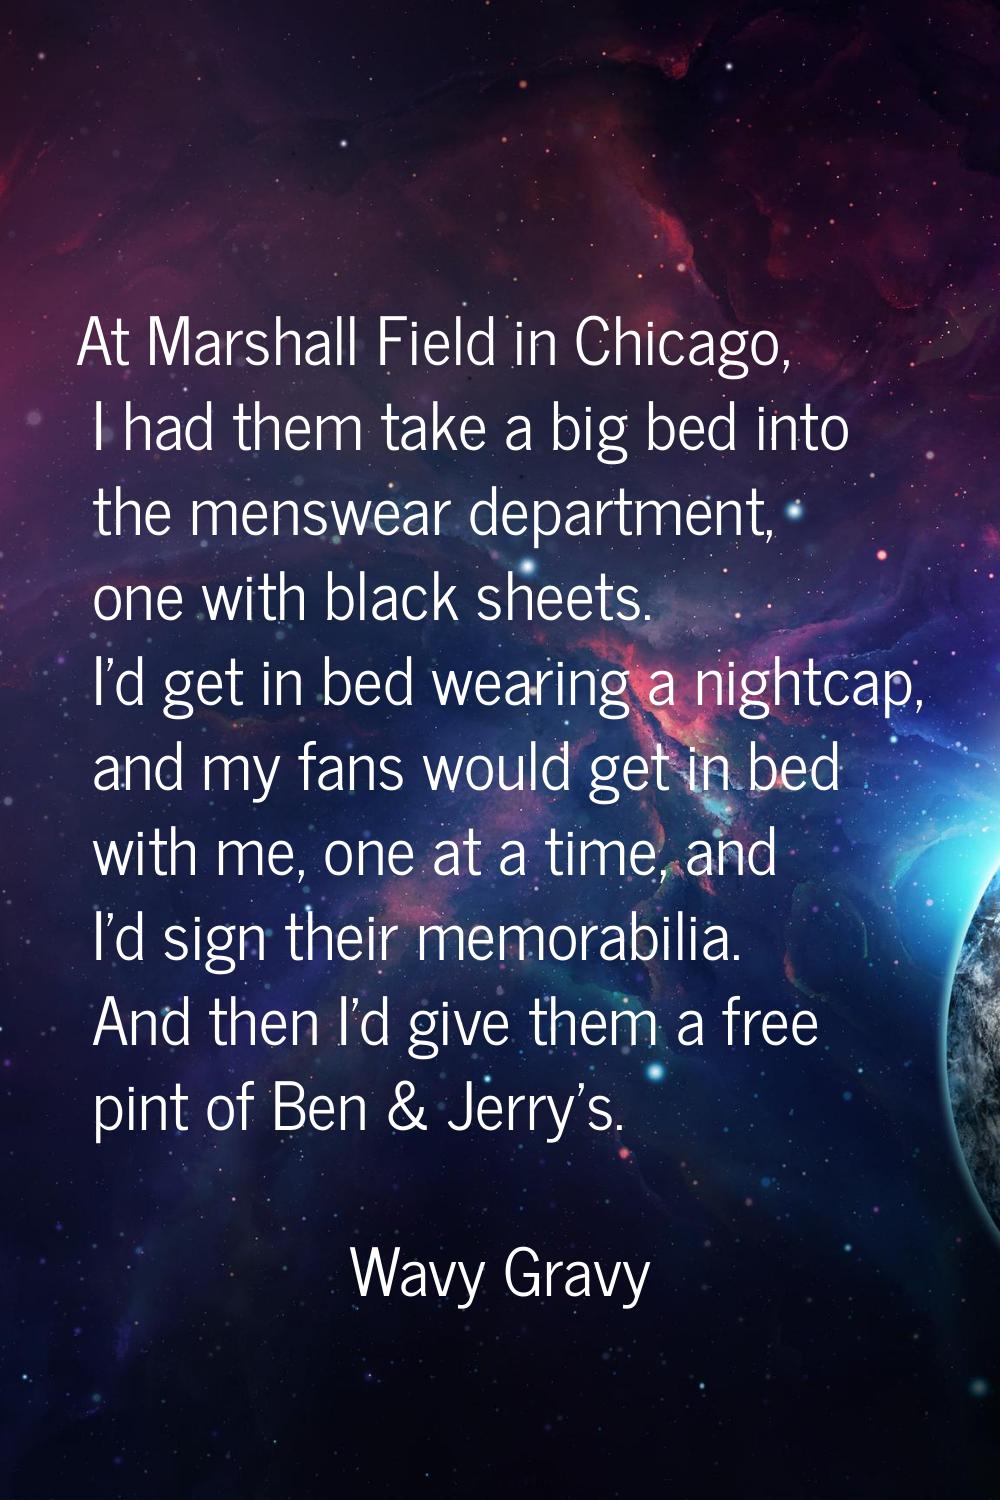 At Marshall Field in Chicago, I had them take a big bed into the menswear department, one with blac